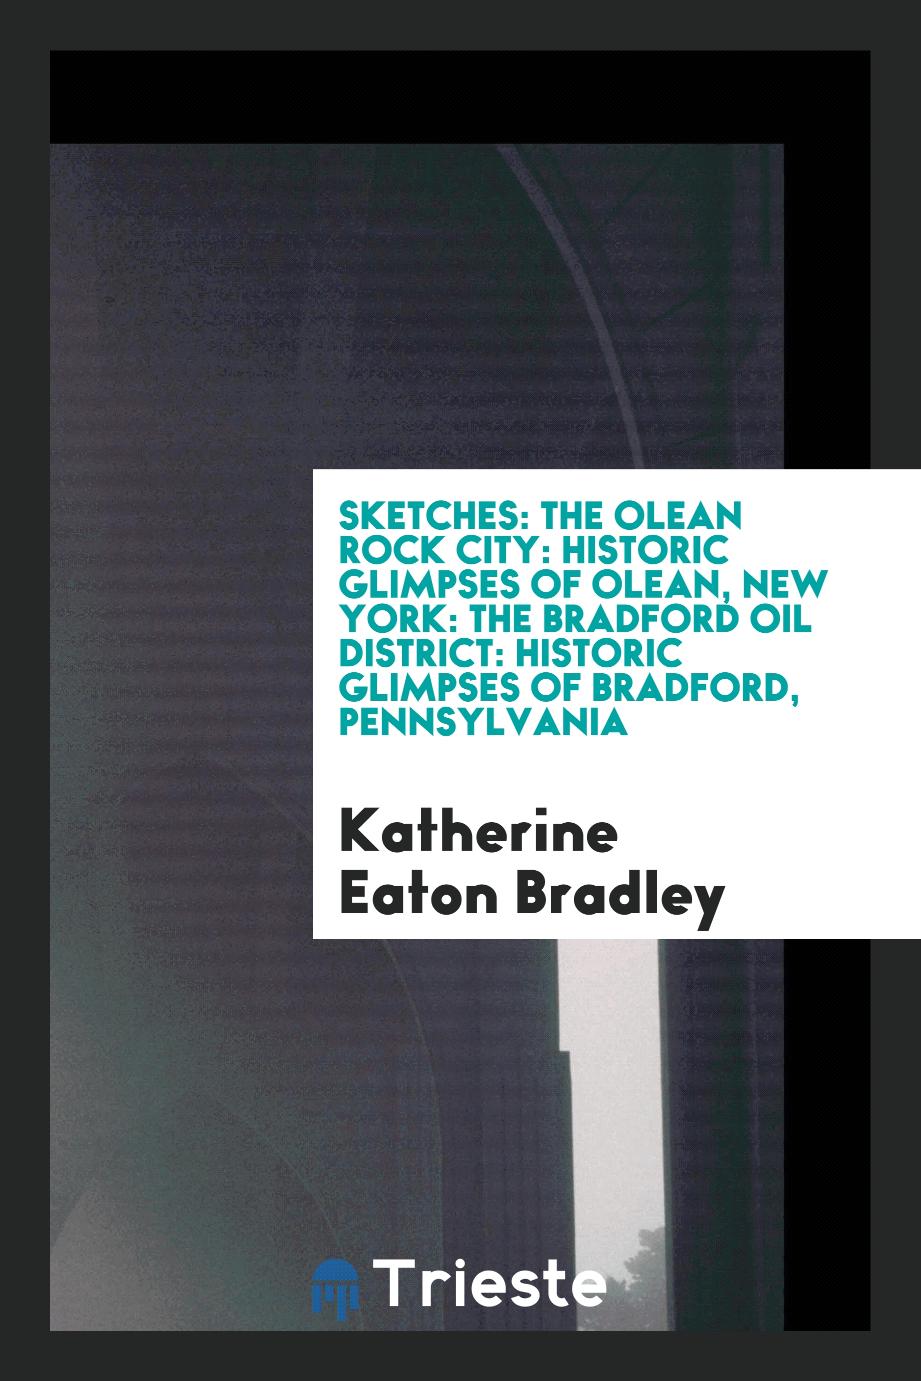 Sketches: The Olean rock city: Historic glimpses of Olean, New York: The Bradford oil district: historic glimpses of Bradford, Pennsylvania